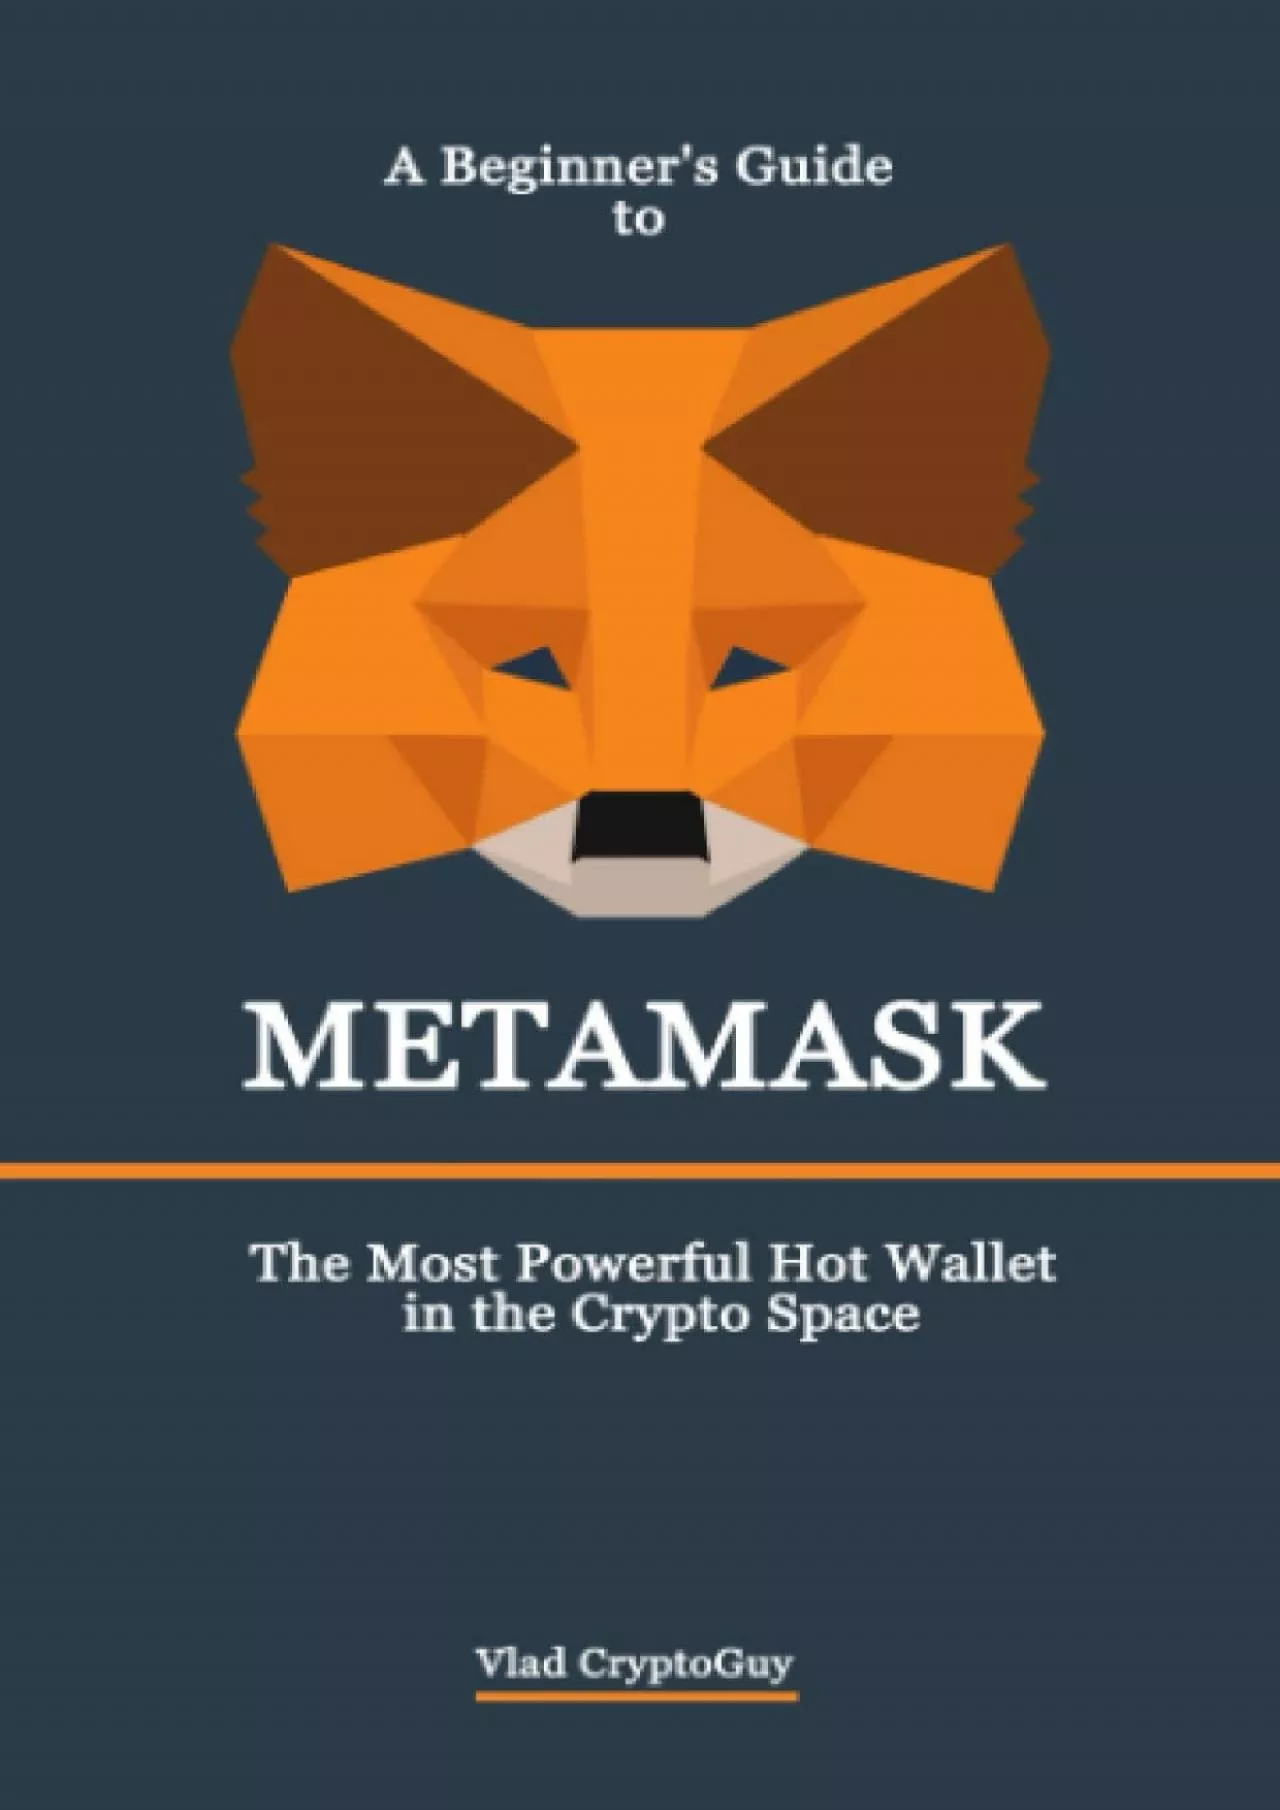 [BEST]-A Beginner\'s Guide to METAMASK: The Most Powerful Hot Wallet in the Crypto Space